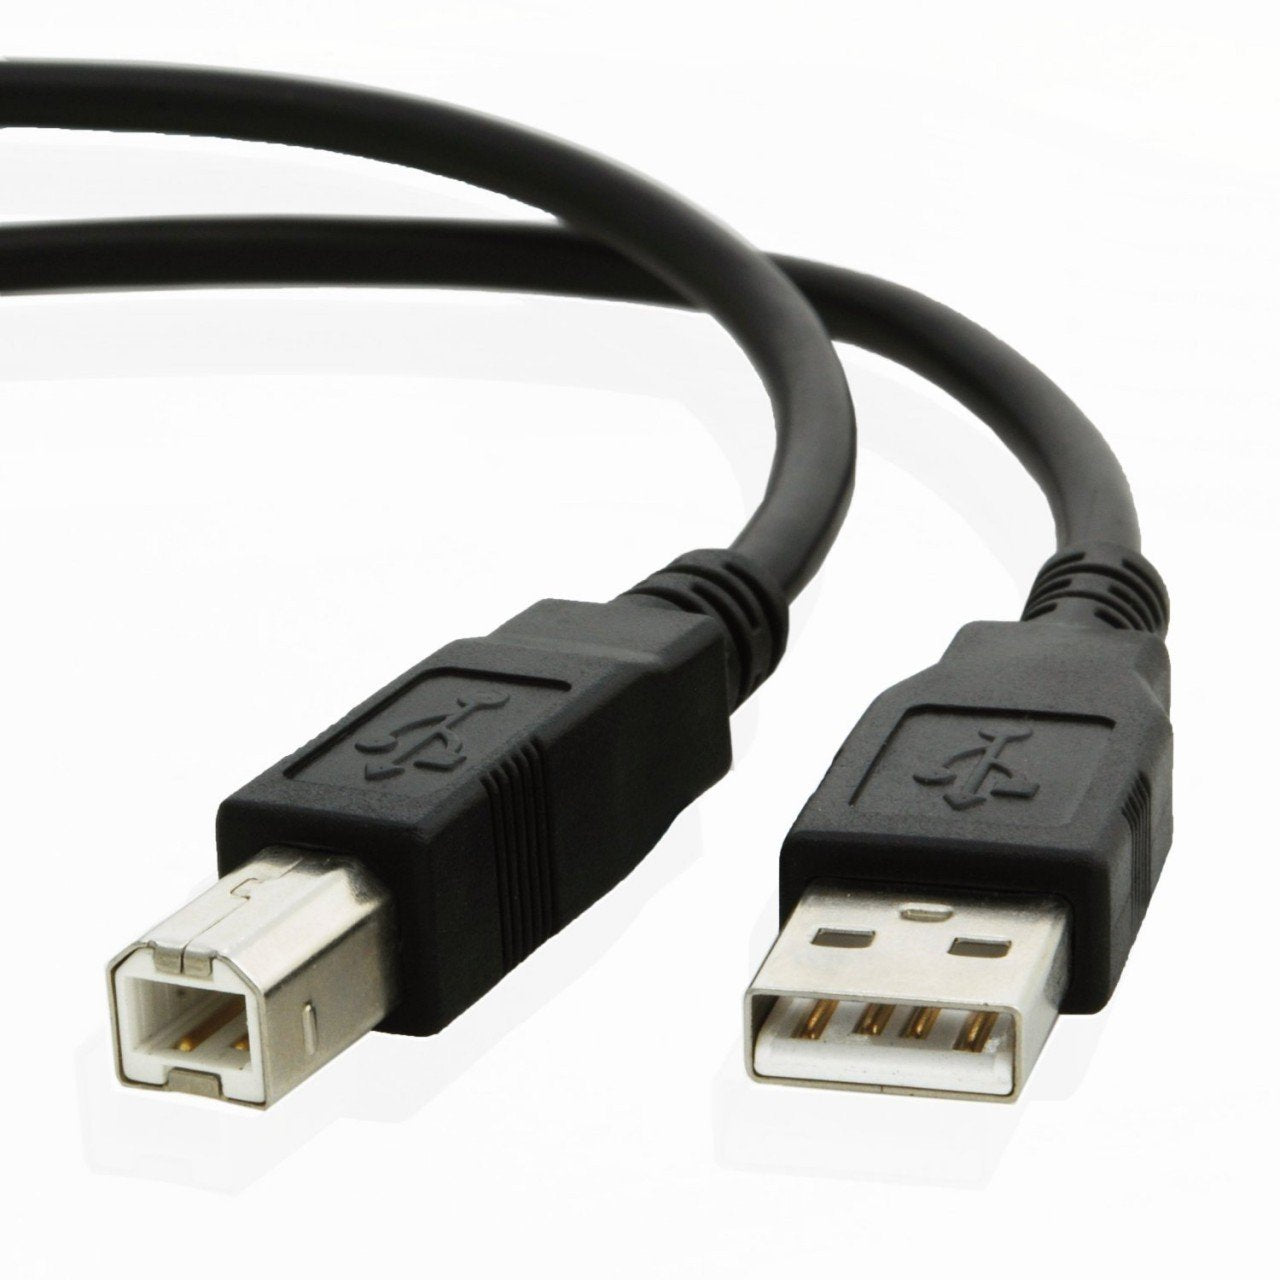 USB cable for Epson POWERLITE 580